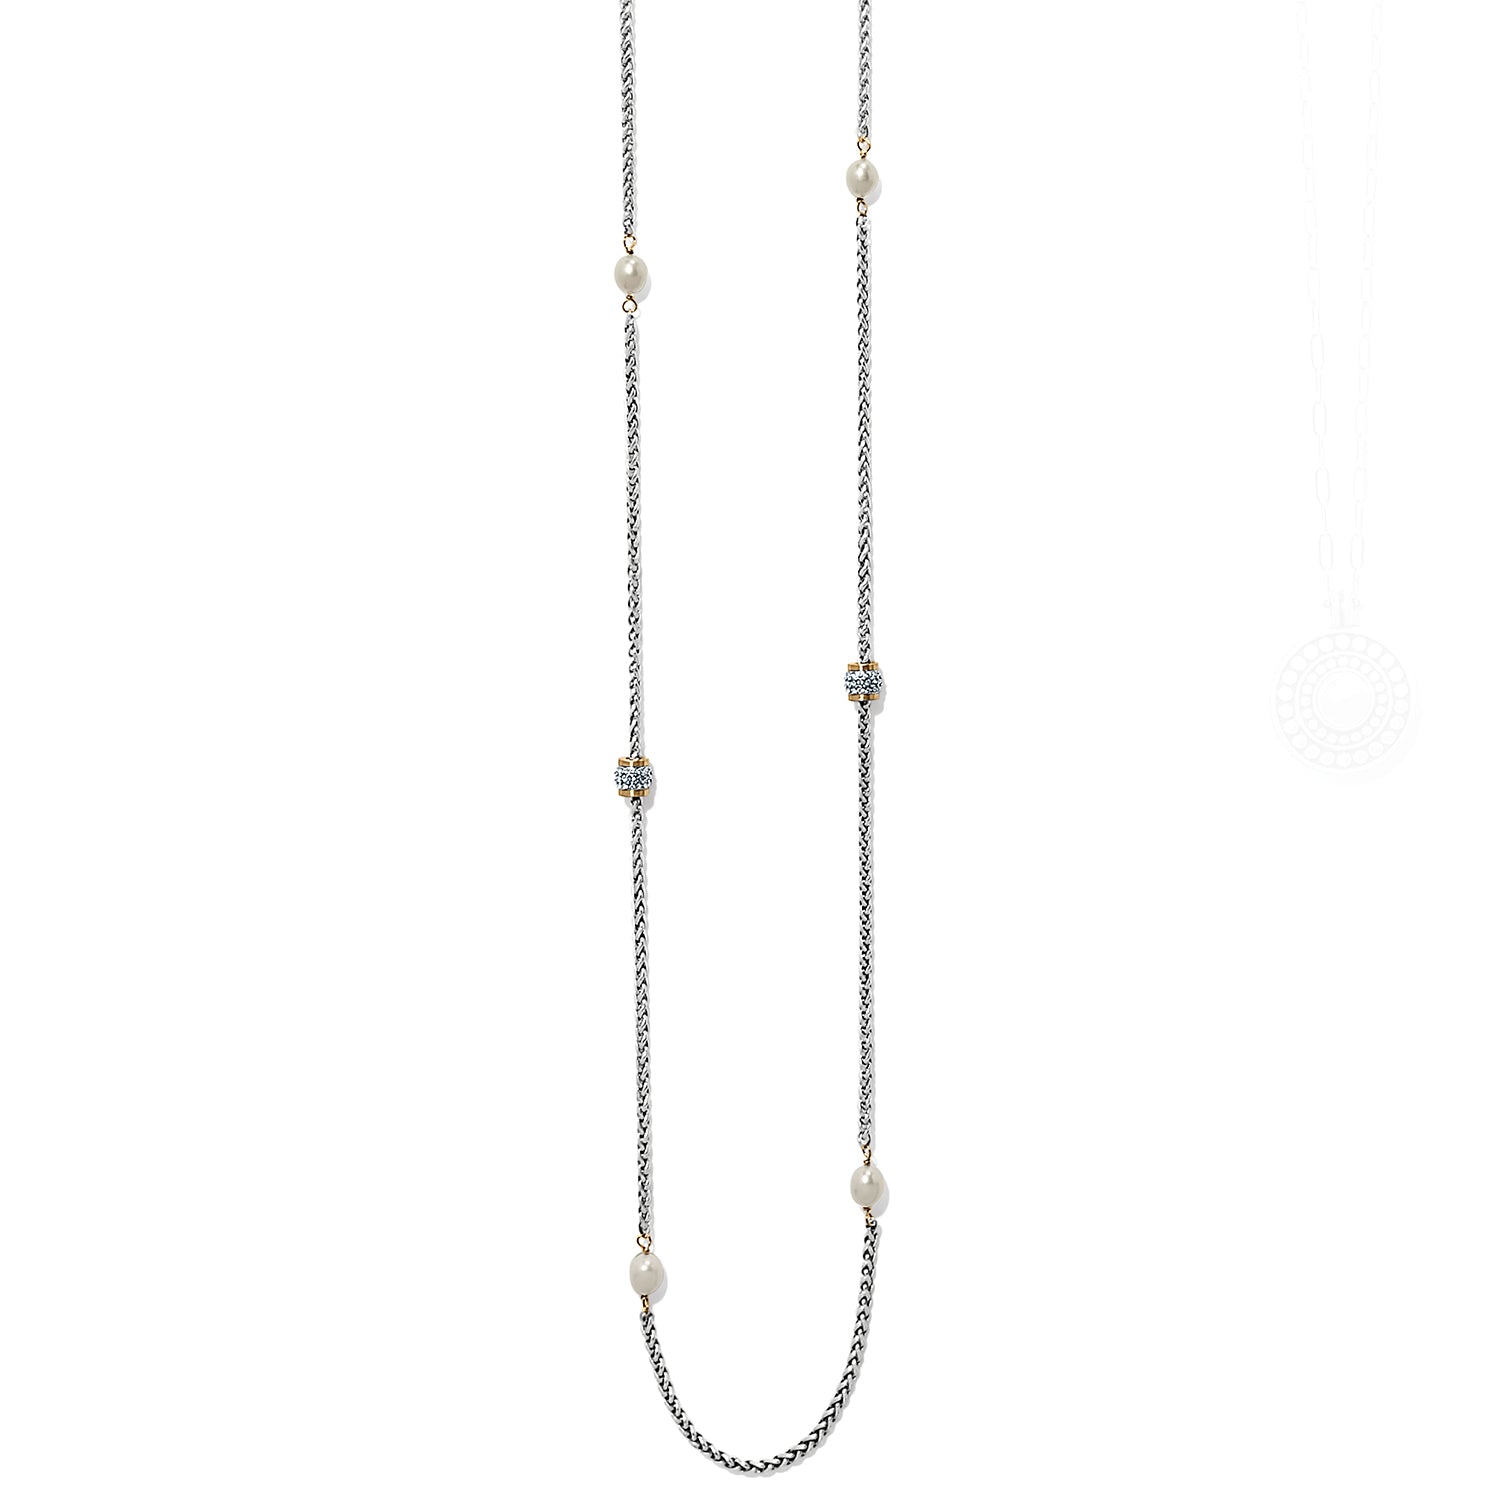 Meridian Pearl Long Necklace